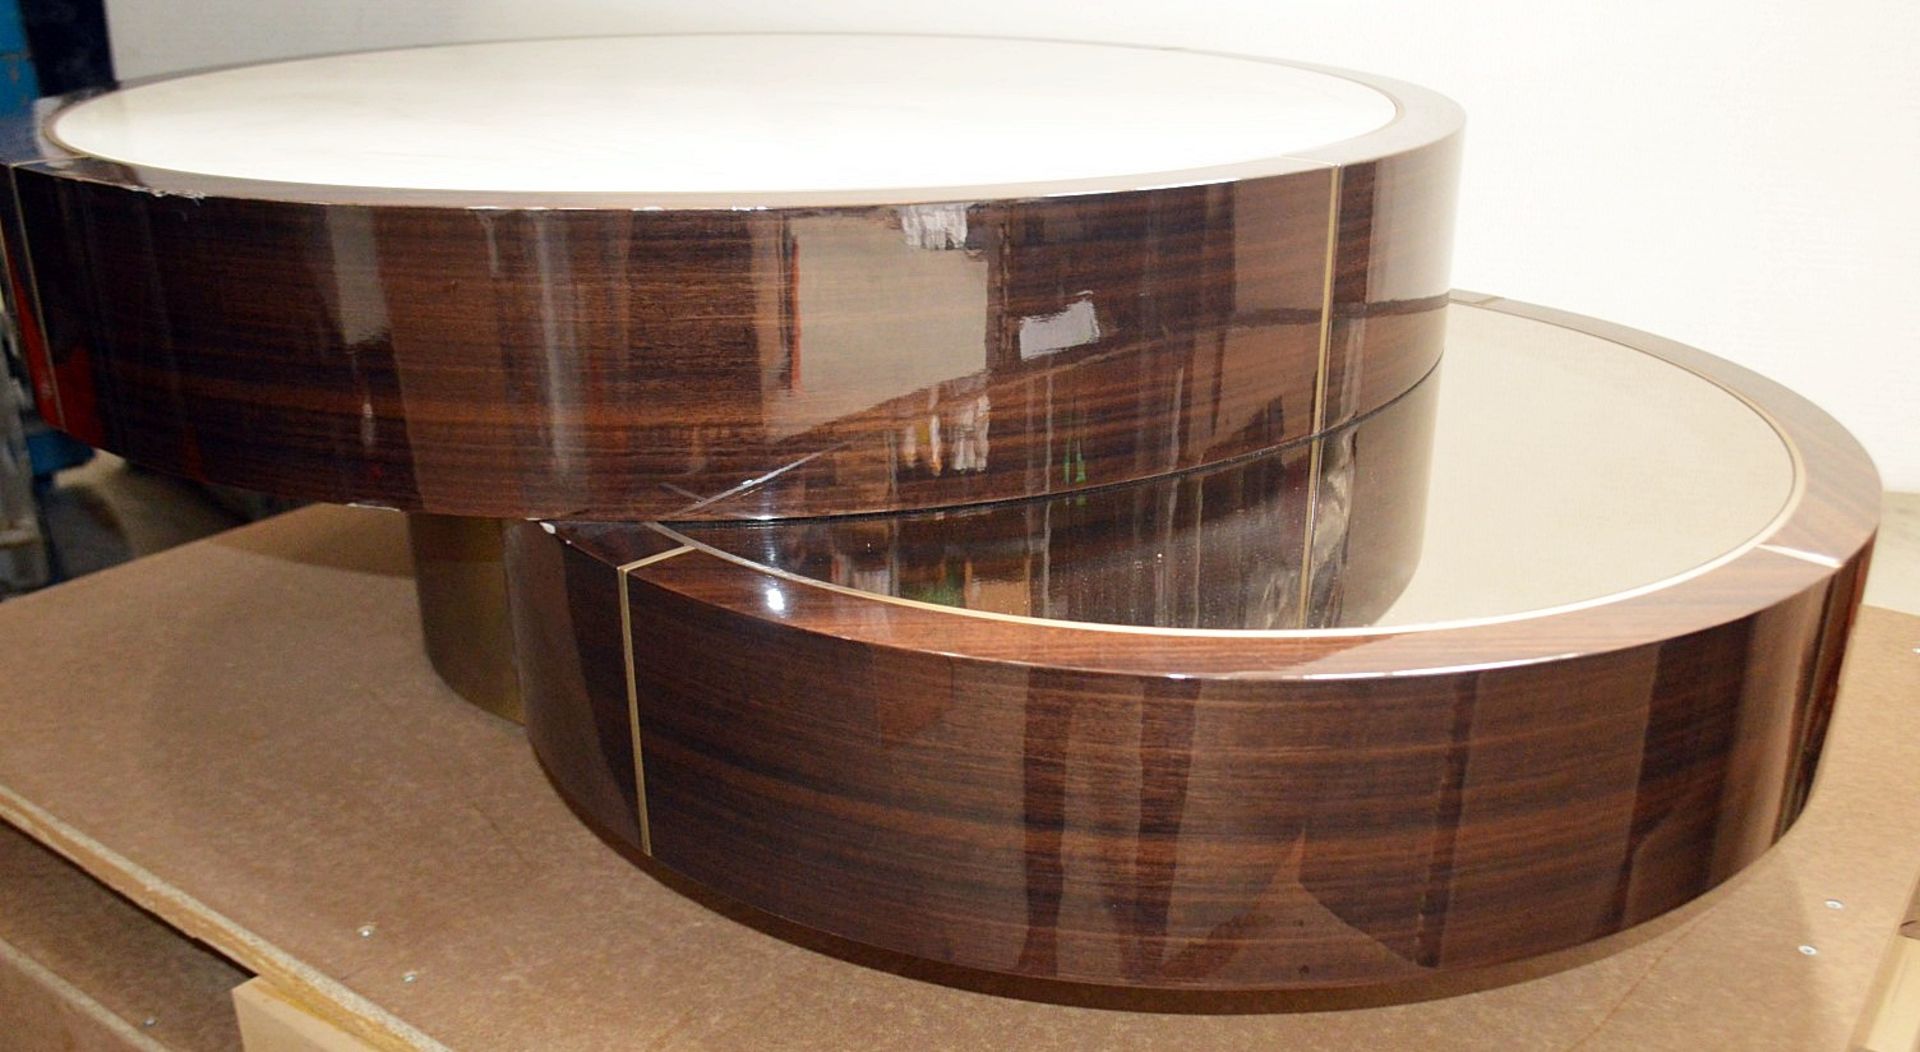 1 x FRATO 'Aarhus' Luxury Coffee Table Topped With Marble With High Gloss Finish - RRP £6,611 - Image 4 of 9